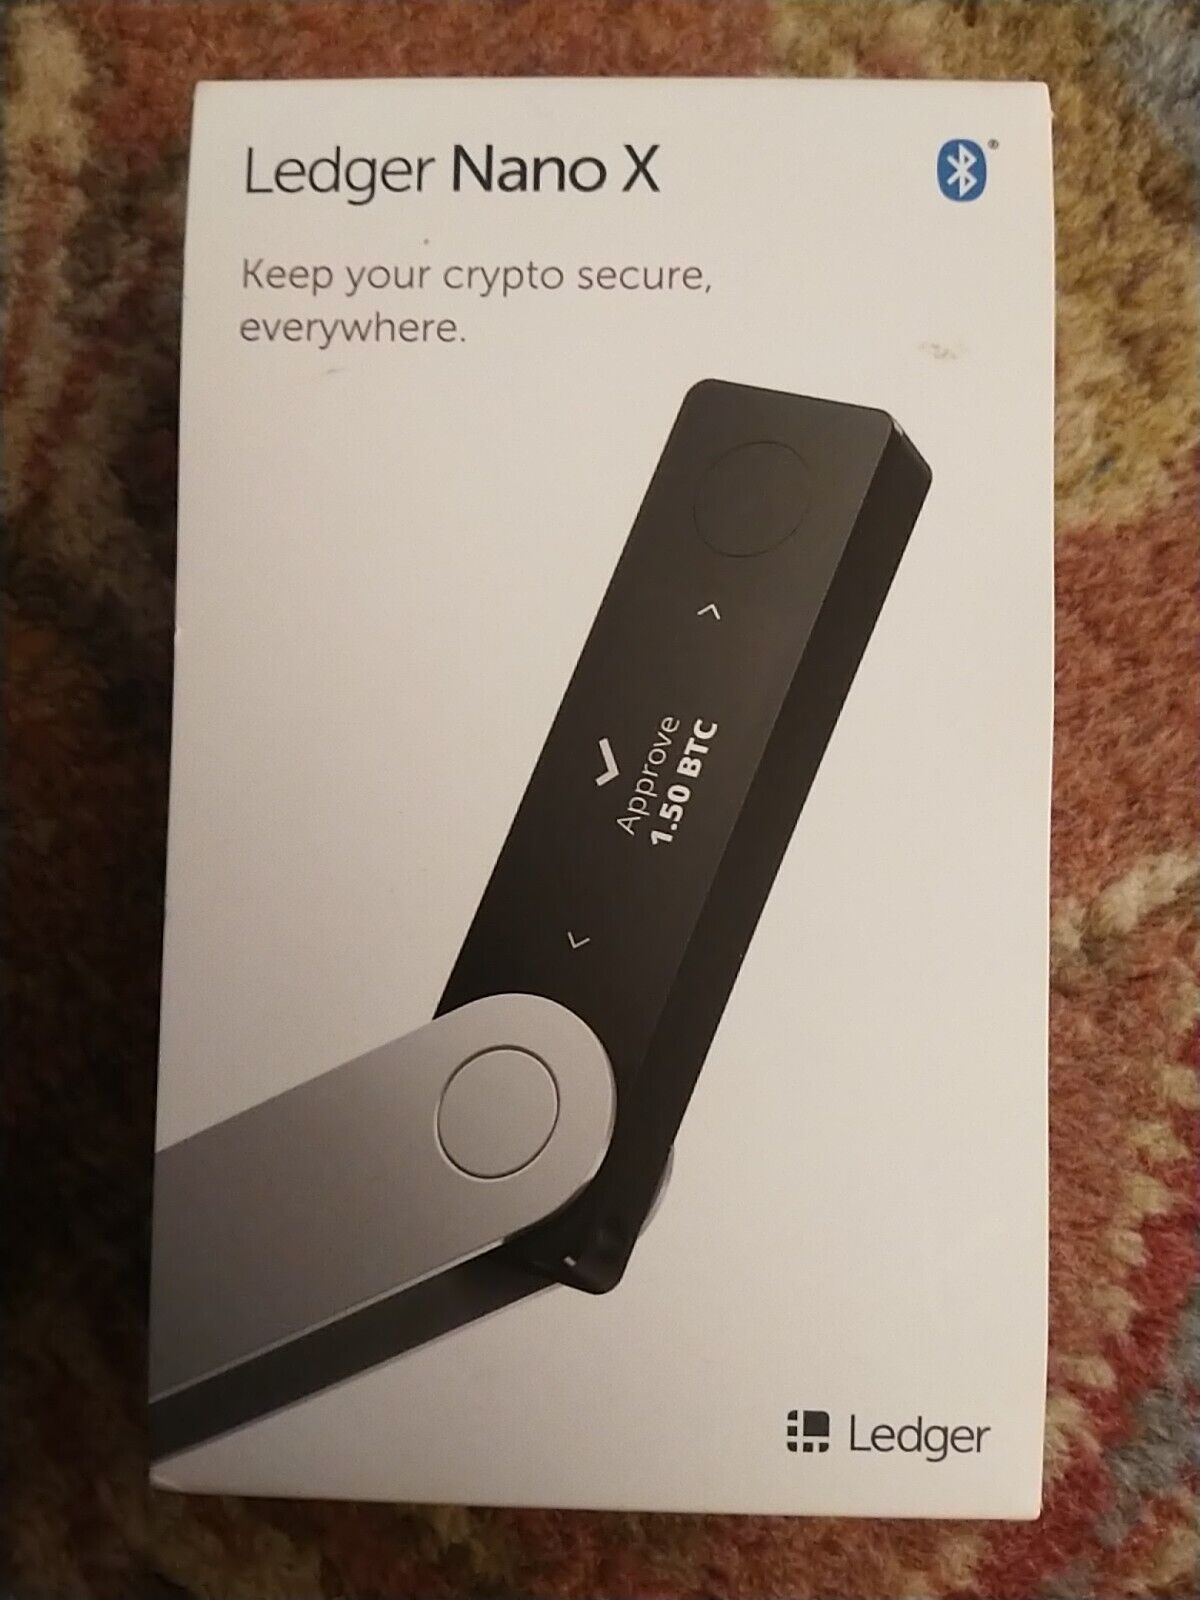 Better to be safe than sorry - securing your XYM with a hardware wallet - Symbol Blog